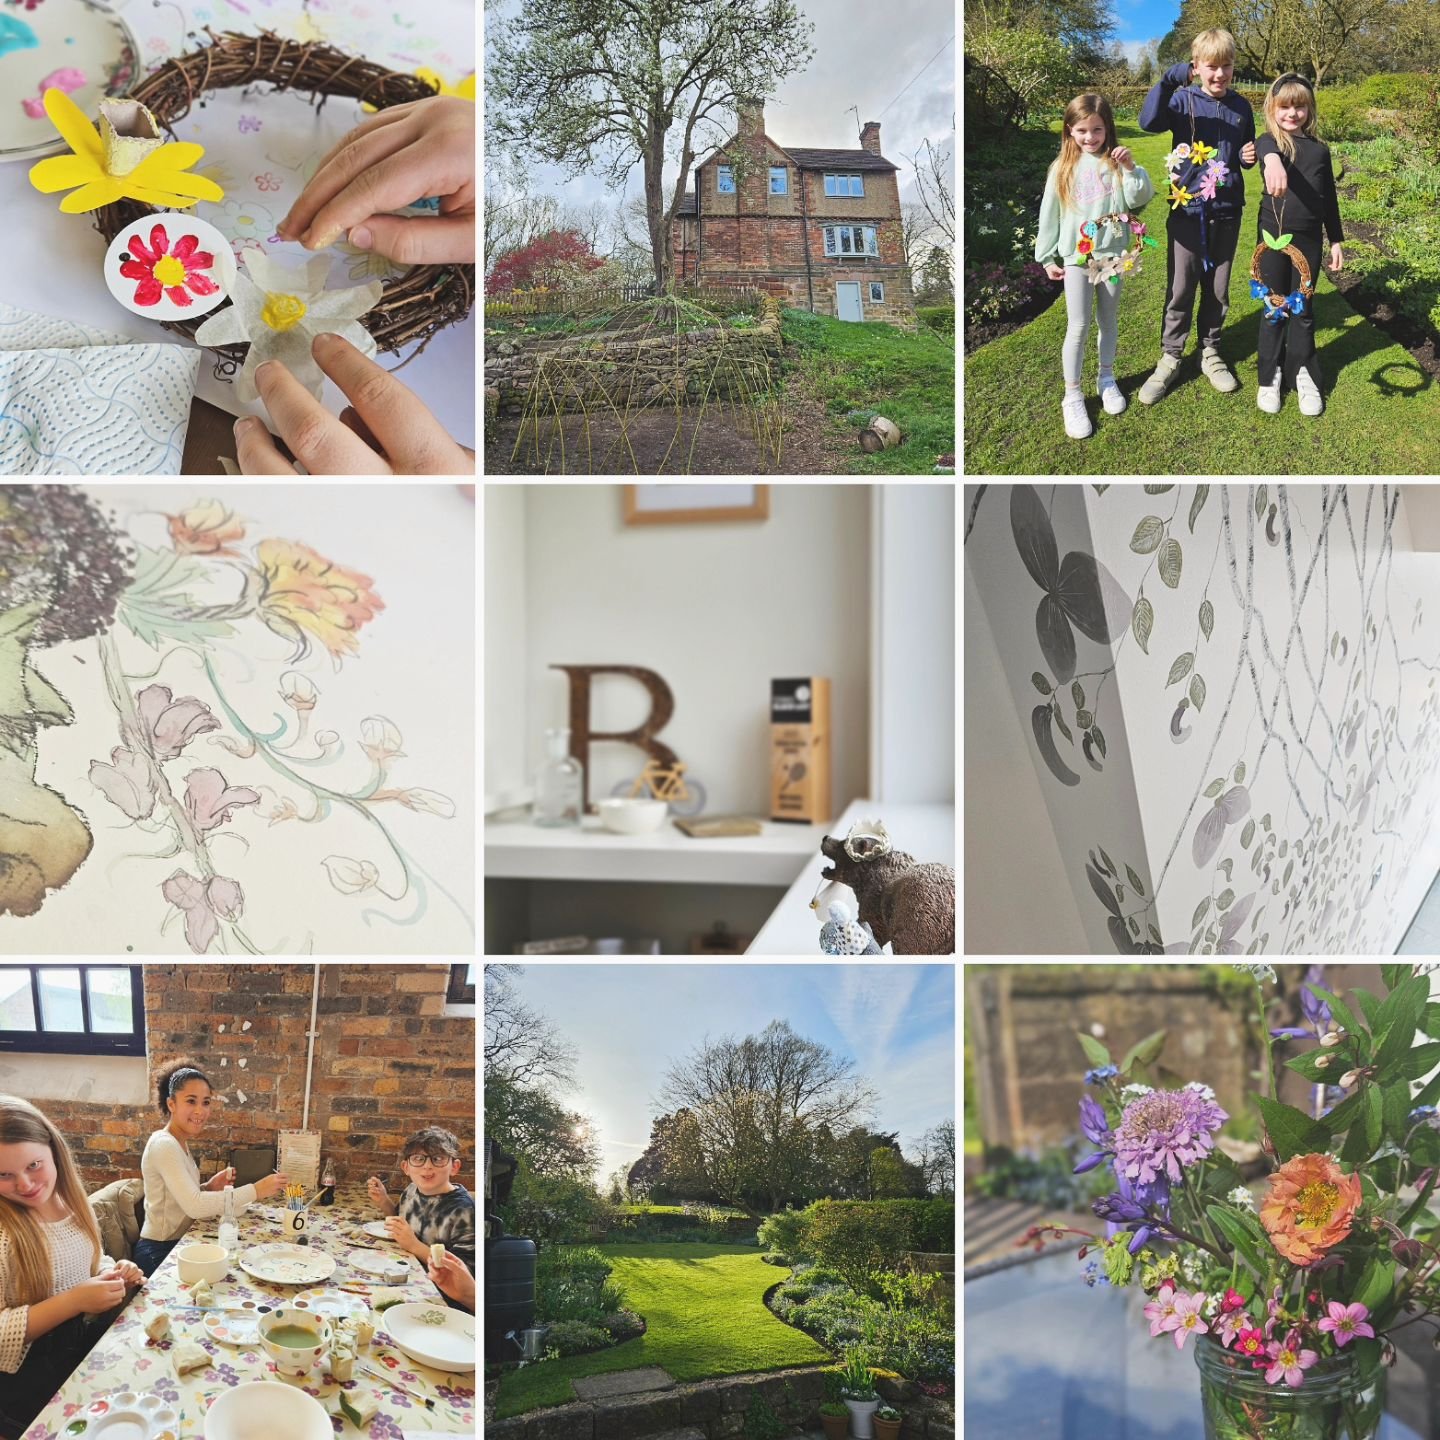 - N A T U R E -

What a lovely April we had. Always love the two weeks off at Easter &amp; this year was no exception. Making the living willow tent, visiting @emma_bridgewater with friends, seeing them &amp; family, it was just lovely spending lots 